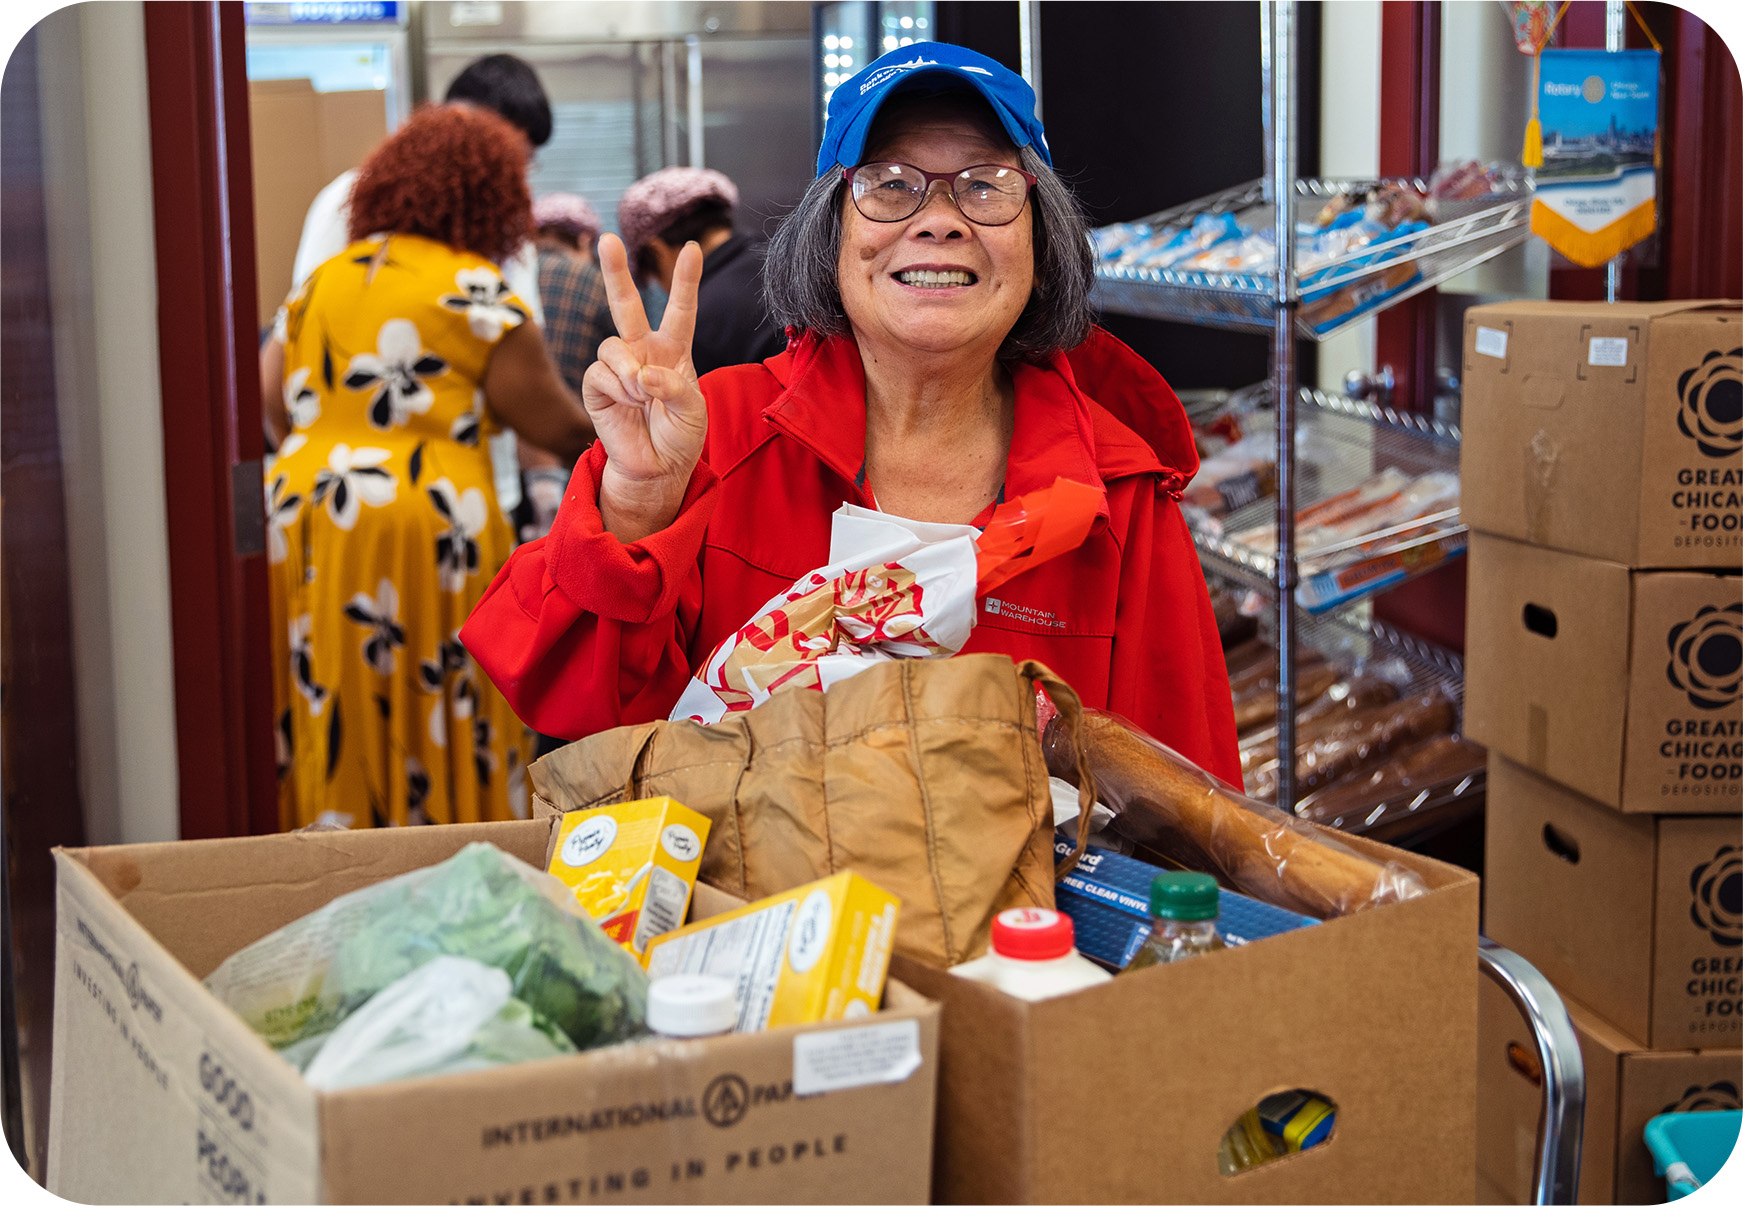 This is Mei, a patron of the food pantry at St. James.